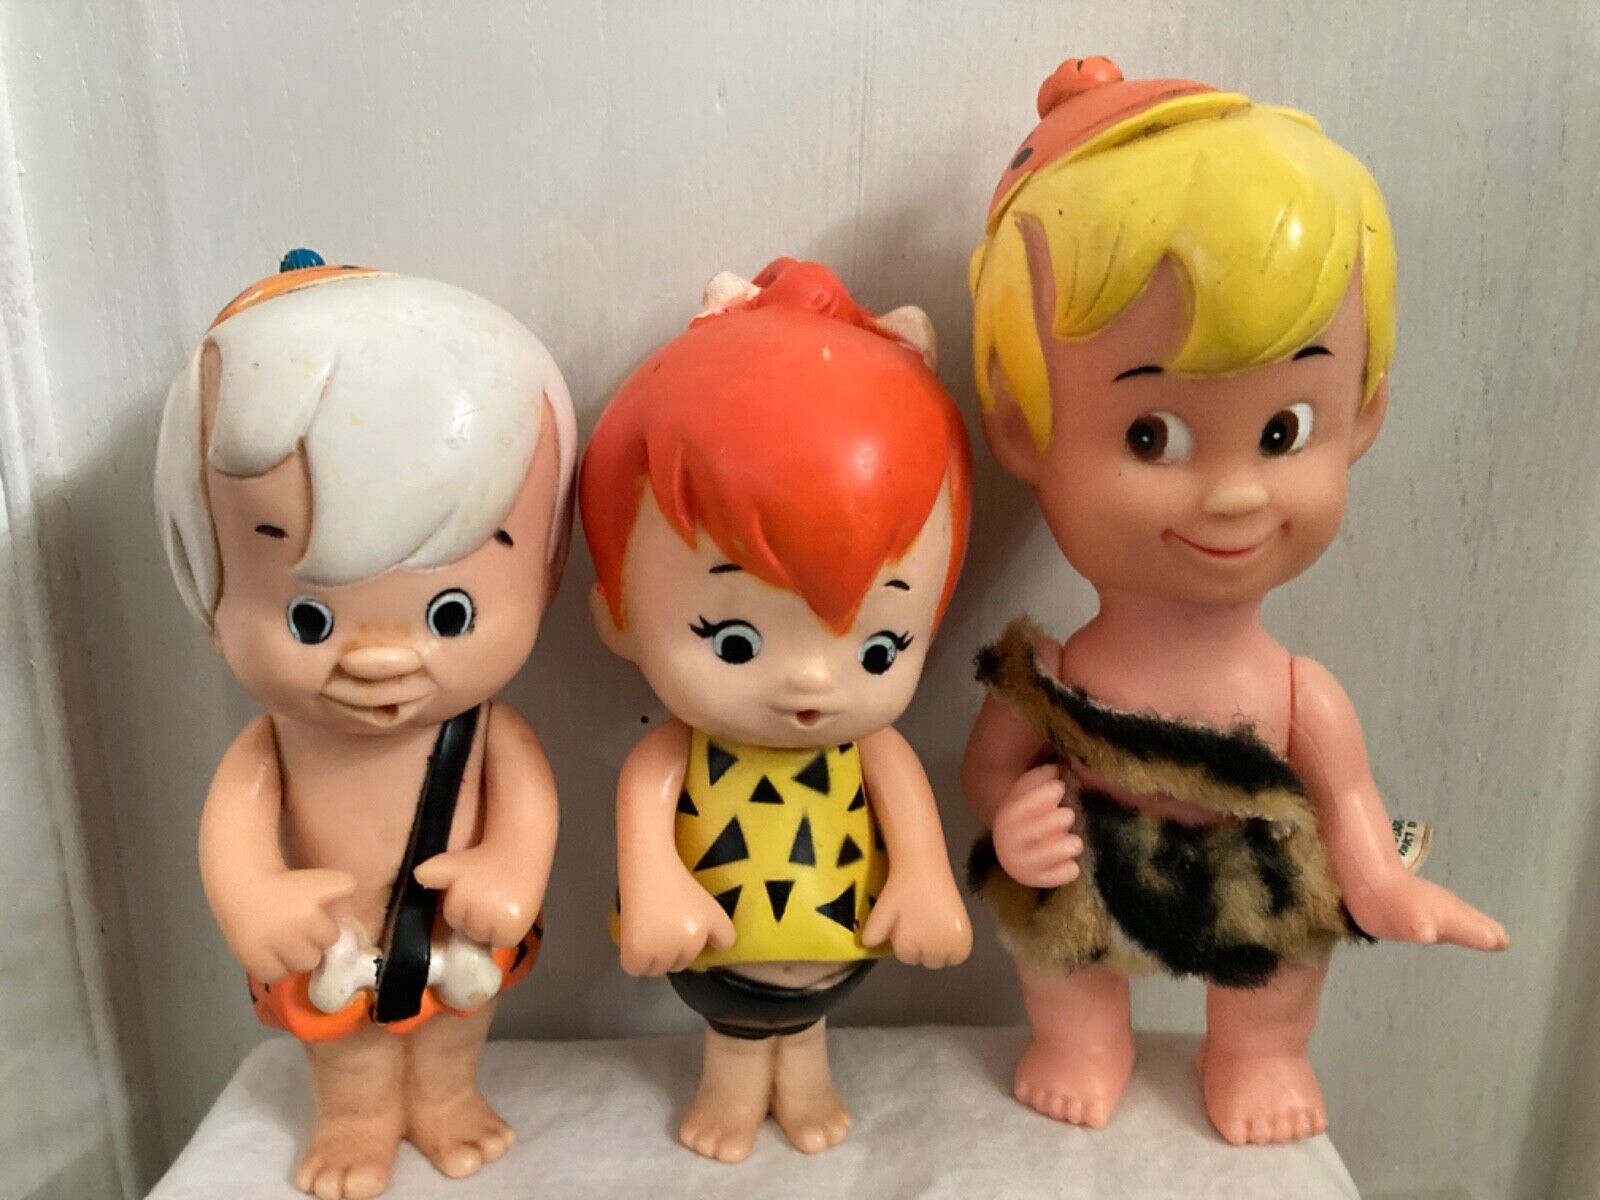 Vintage BamBams and Pebbles Dolls 1970’s